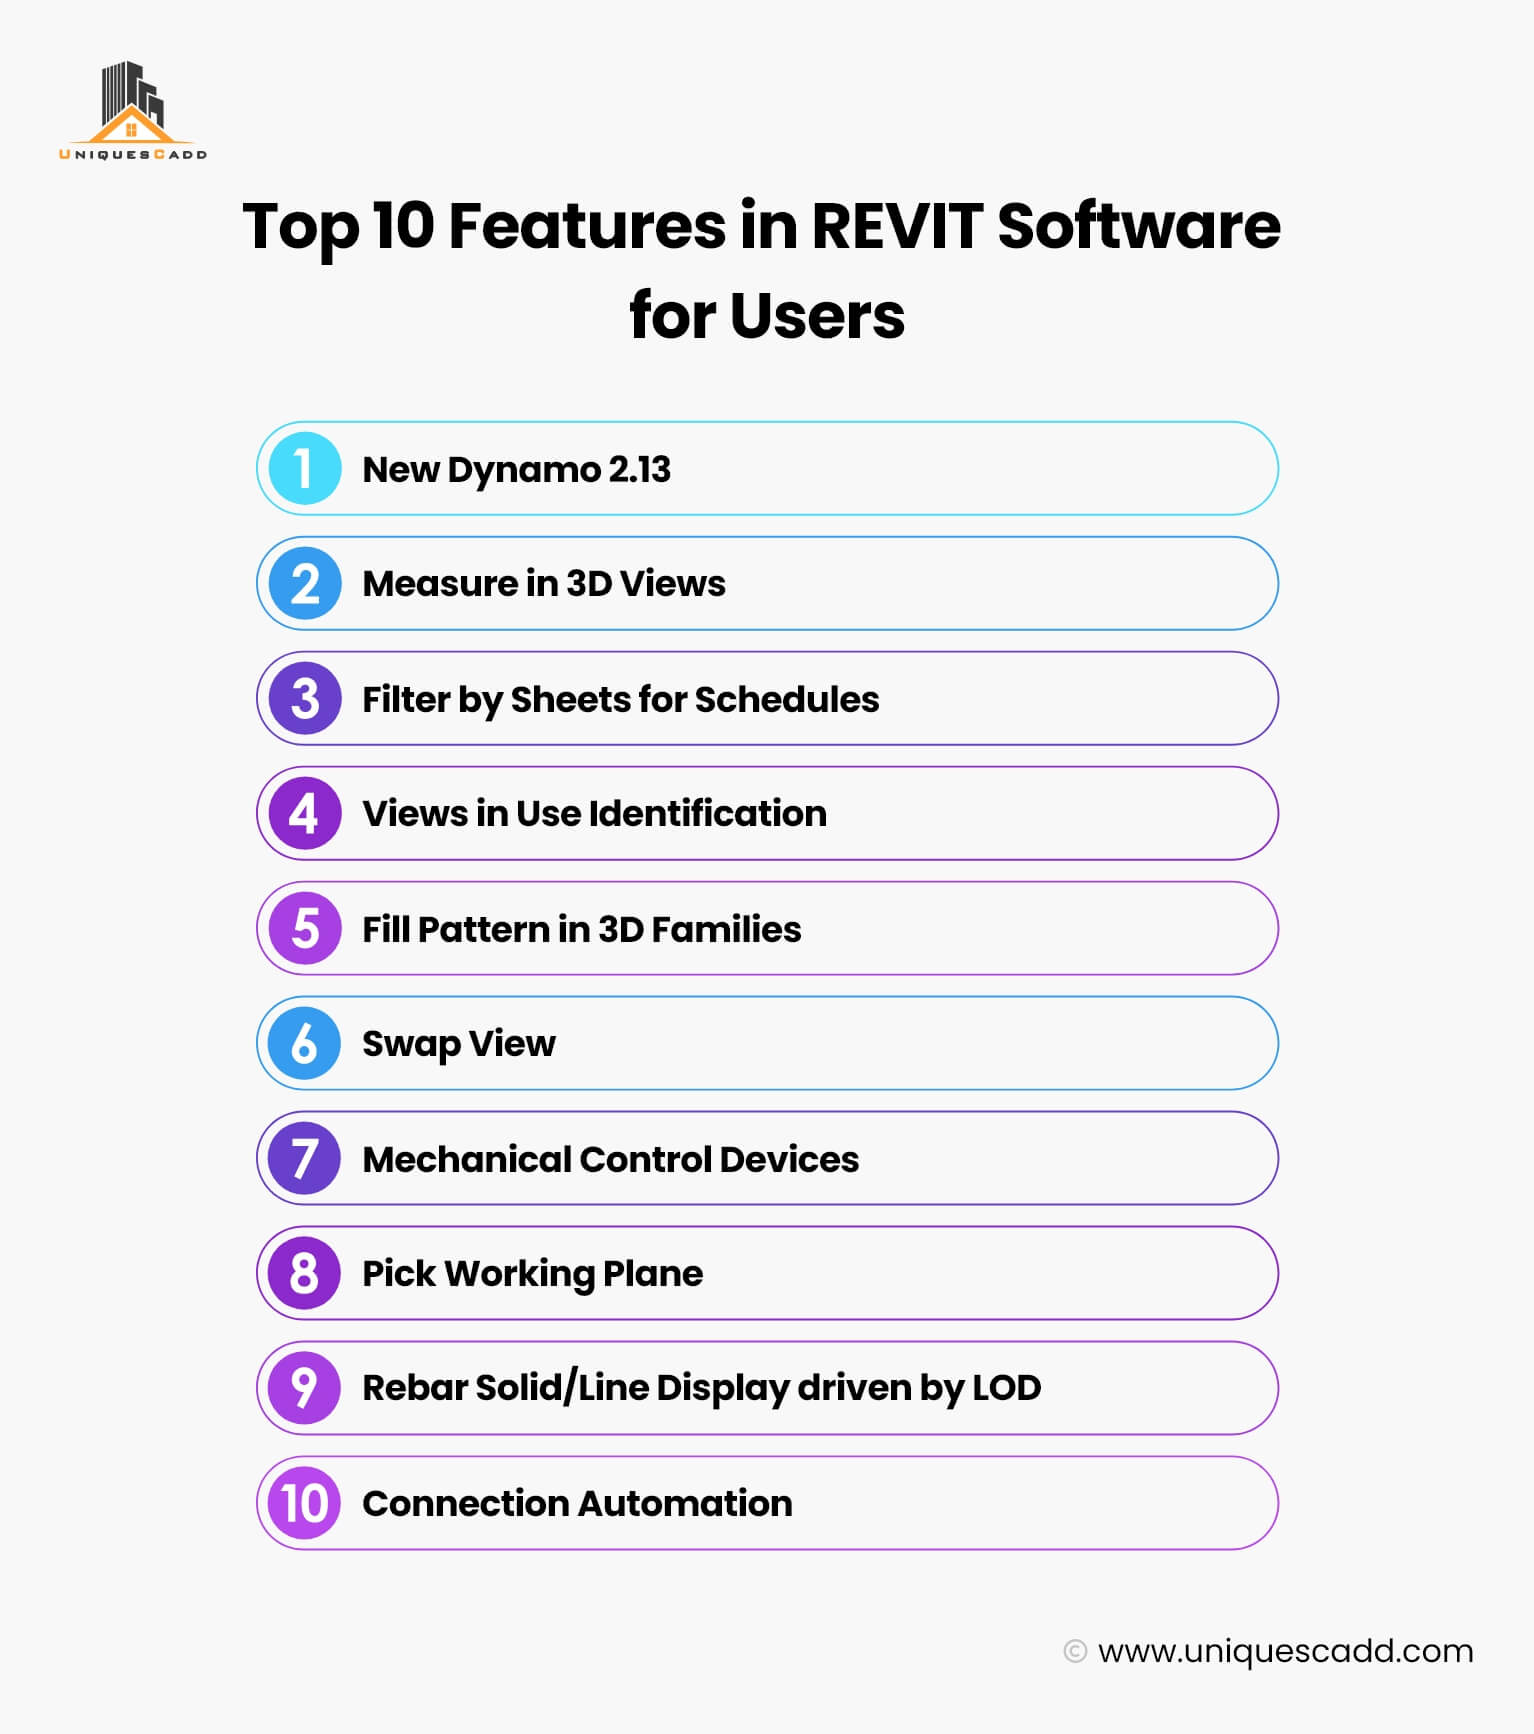 Top 10 Features in REVIT Software for Users